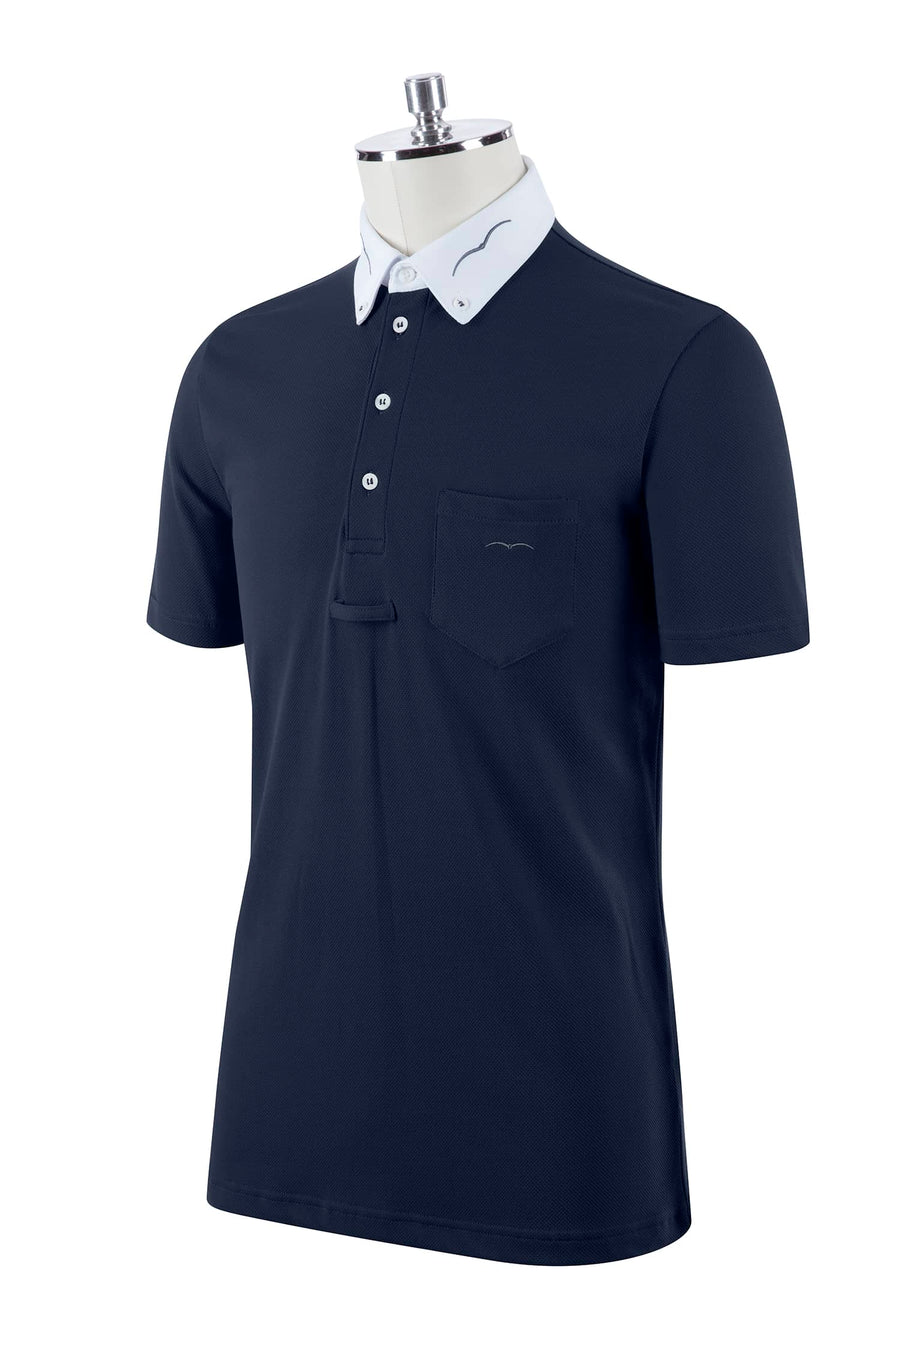 White Men's short-sleeve competition polo with button-down collar and a tie-clip. Embroidered Albatross logo on the pocket and collar.